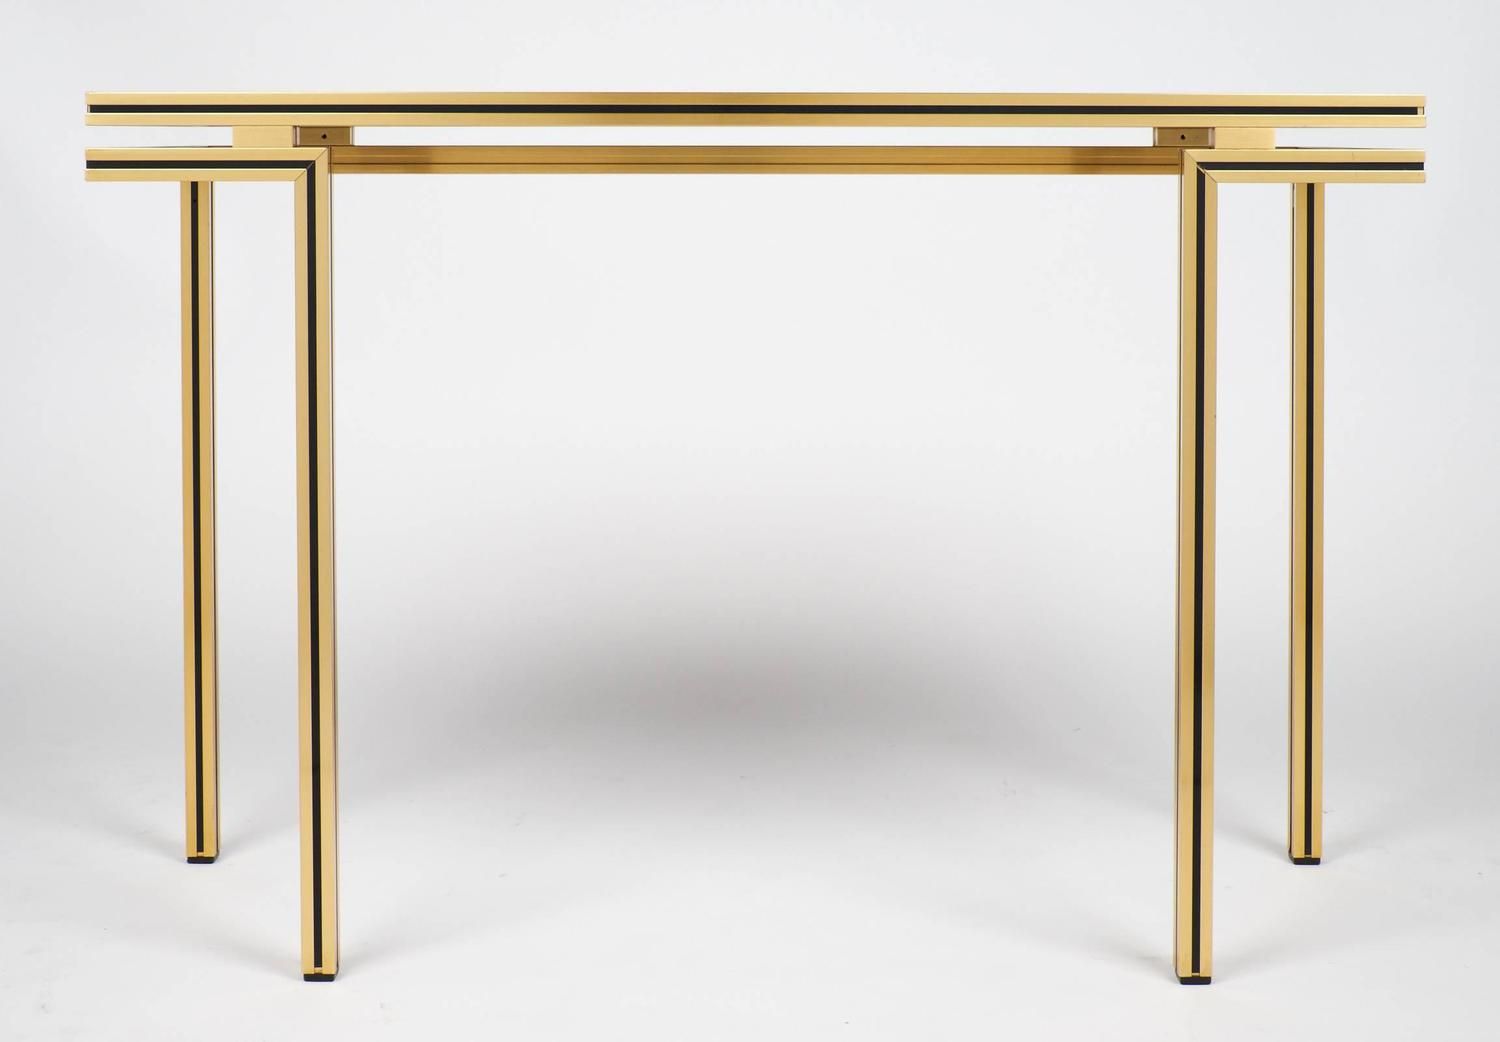 Vintage Black Glass Top Brass Console Tablepierre Vandel At 1stdibs In Black Round Glass Top Console Tables (View 9 of 20)